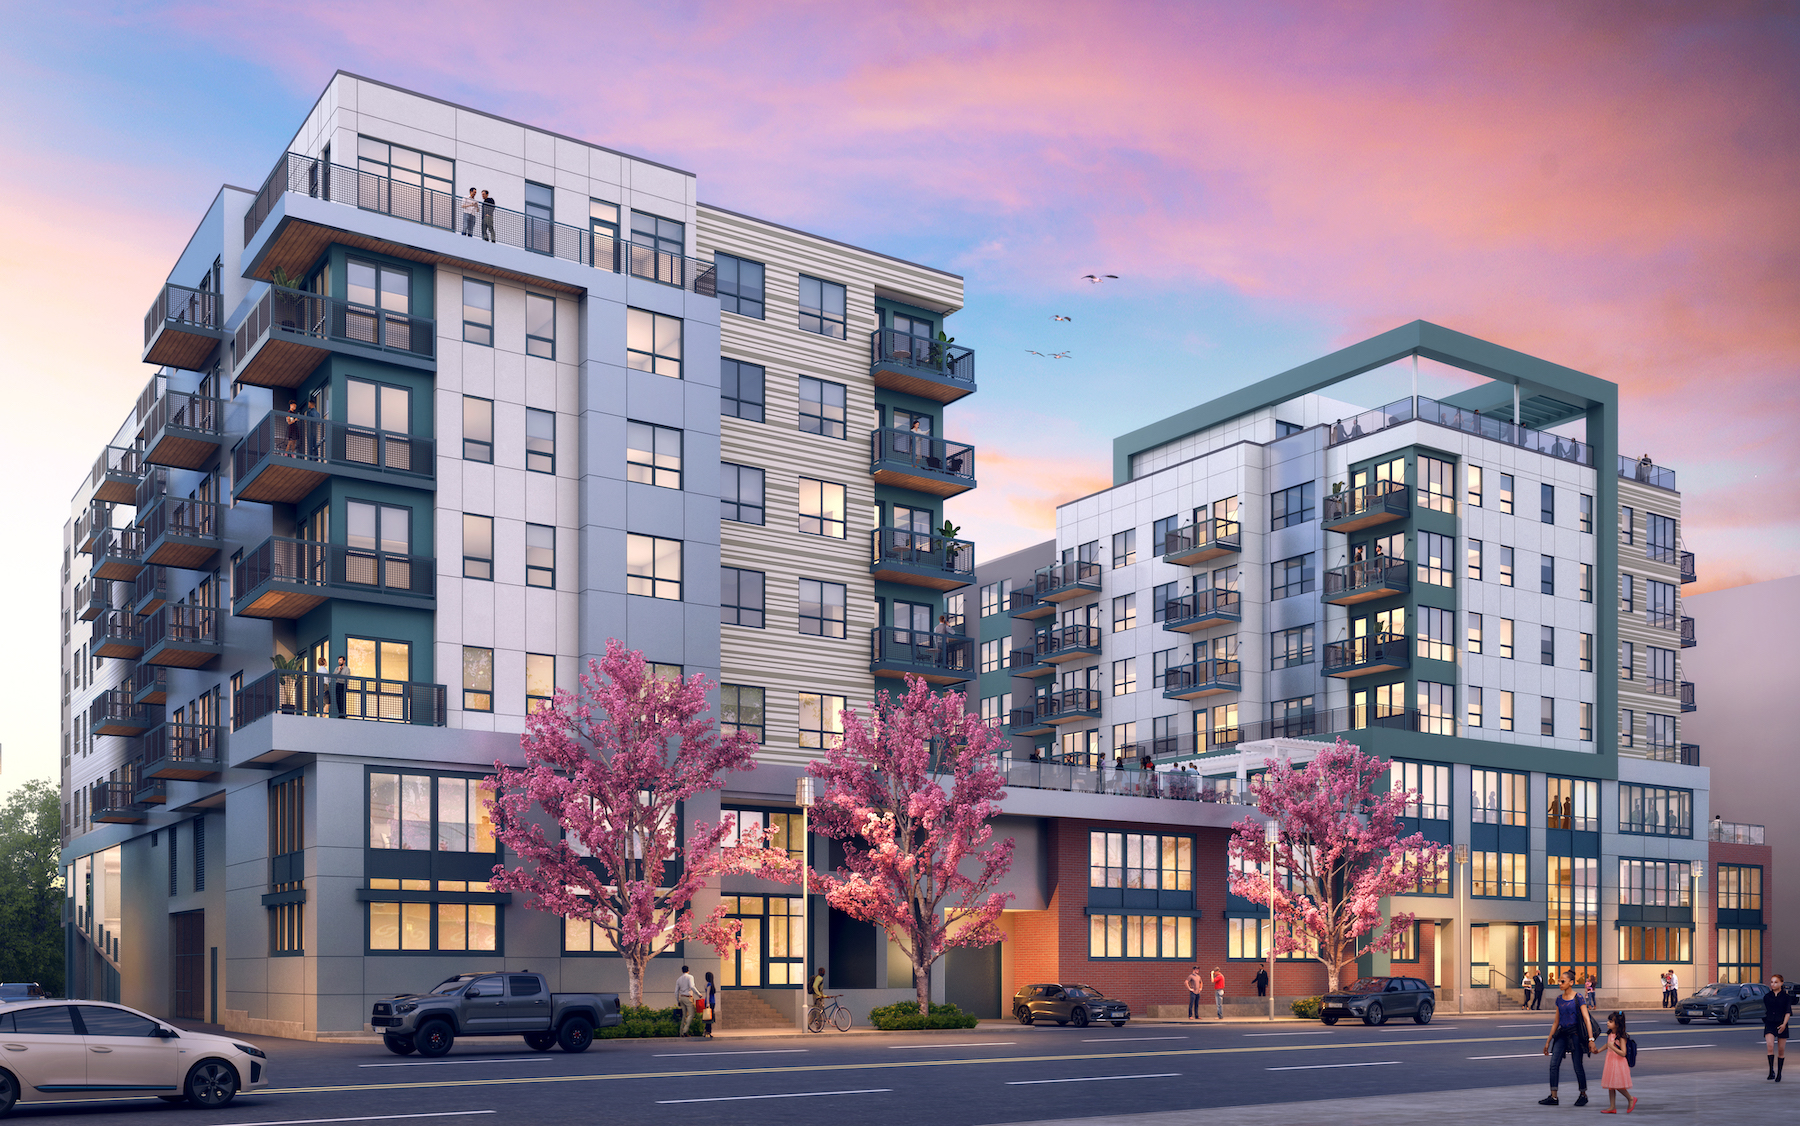 Congress/EMJ has been selected by a partnership of Hines, Belfonti Companies, and Bridge Investment Group to serve as the construction manager for their 209-unit apartment community on Revere Beach.